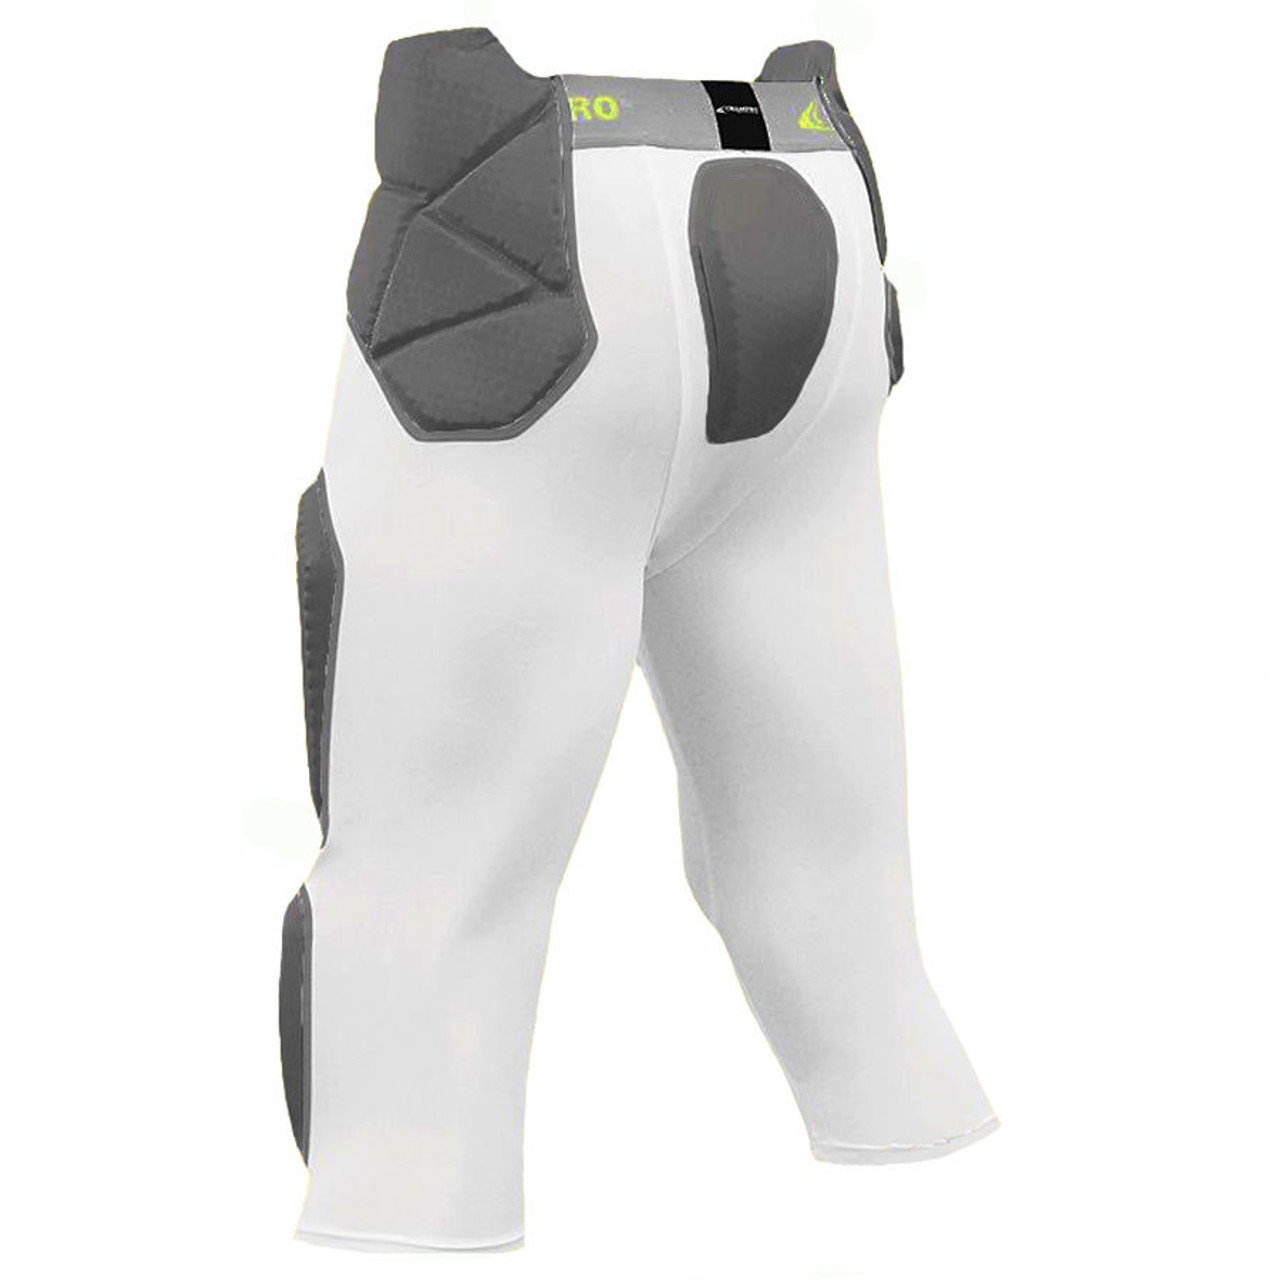 Champro Men's Formation 5-pad Integrated Girdle 4xl White